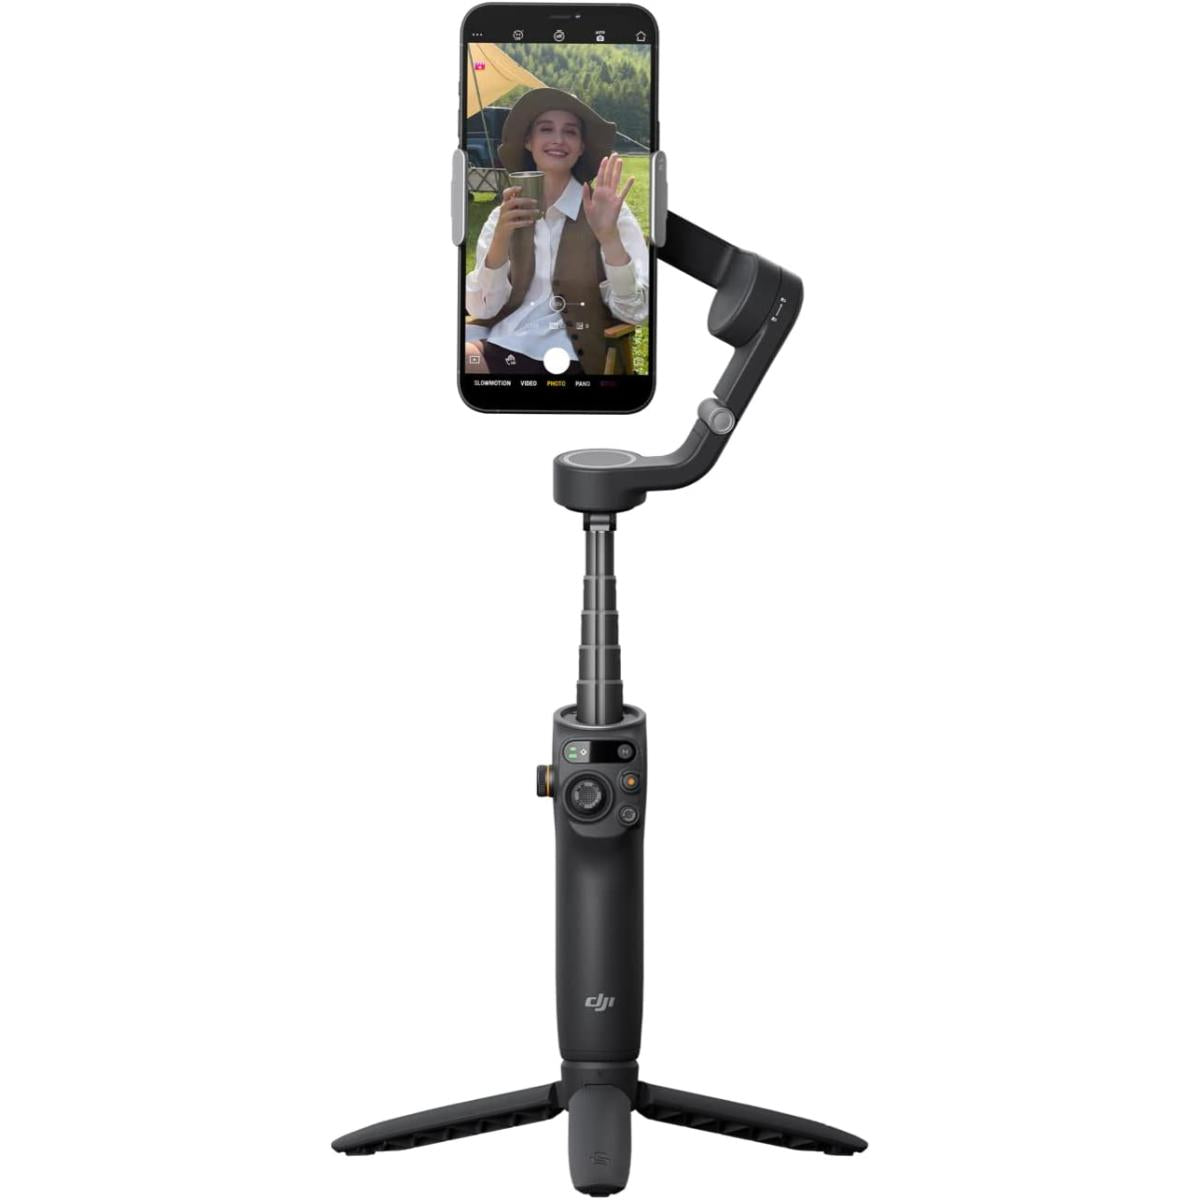 DJI Osmo Mobile 6 Gimbal 3-Axis Stabilizer for Smartphones - Black